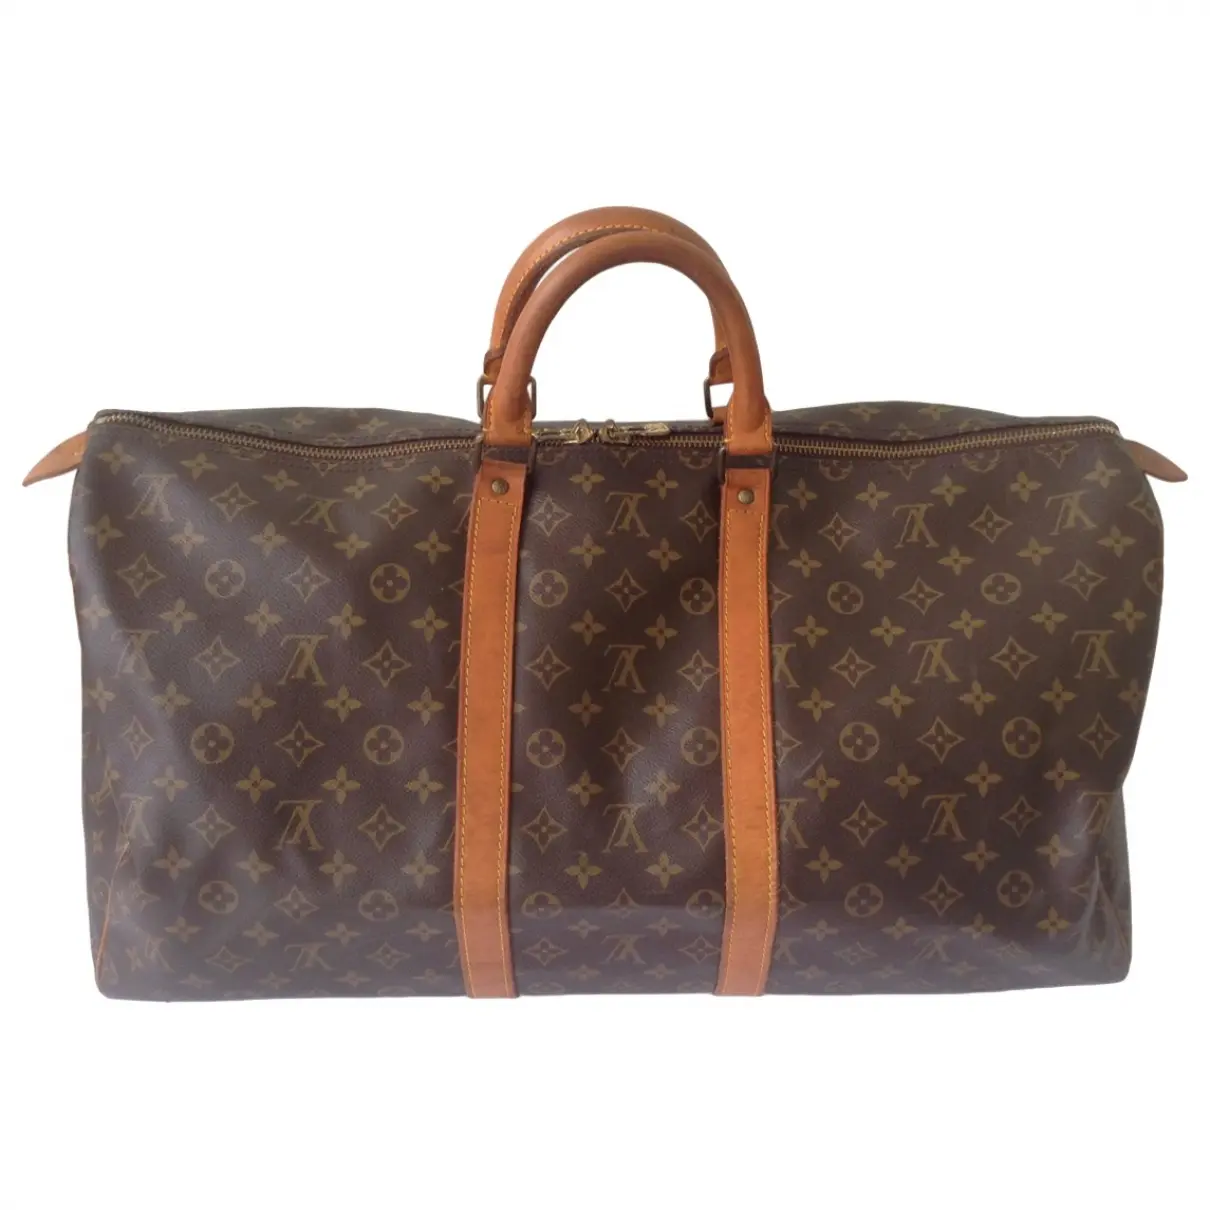 Keepall leather travel bag Louis Vuitton